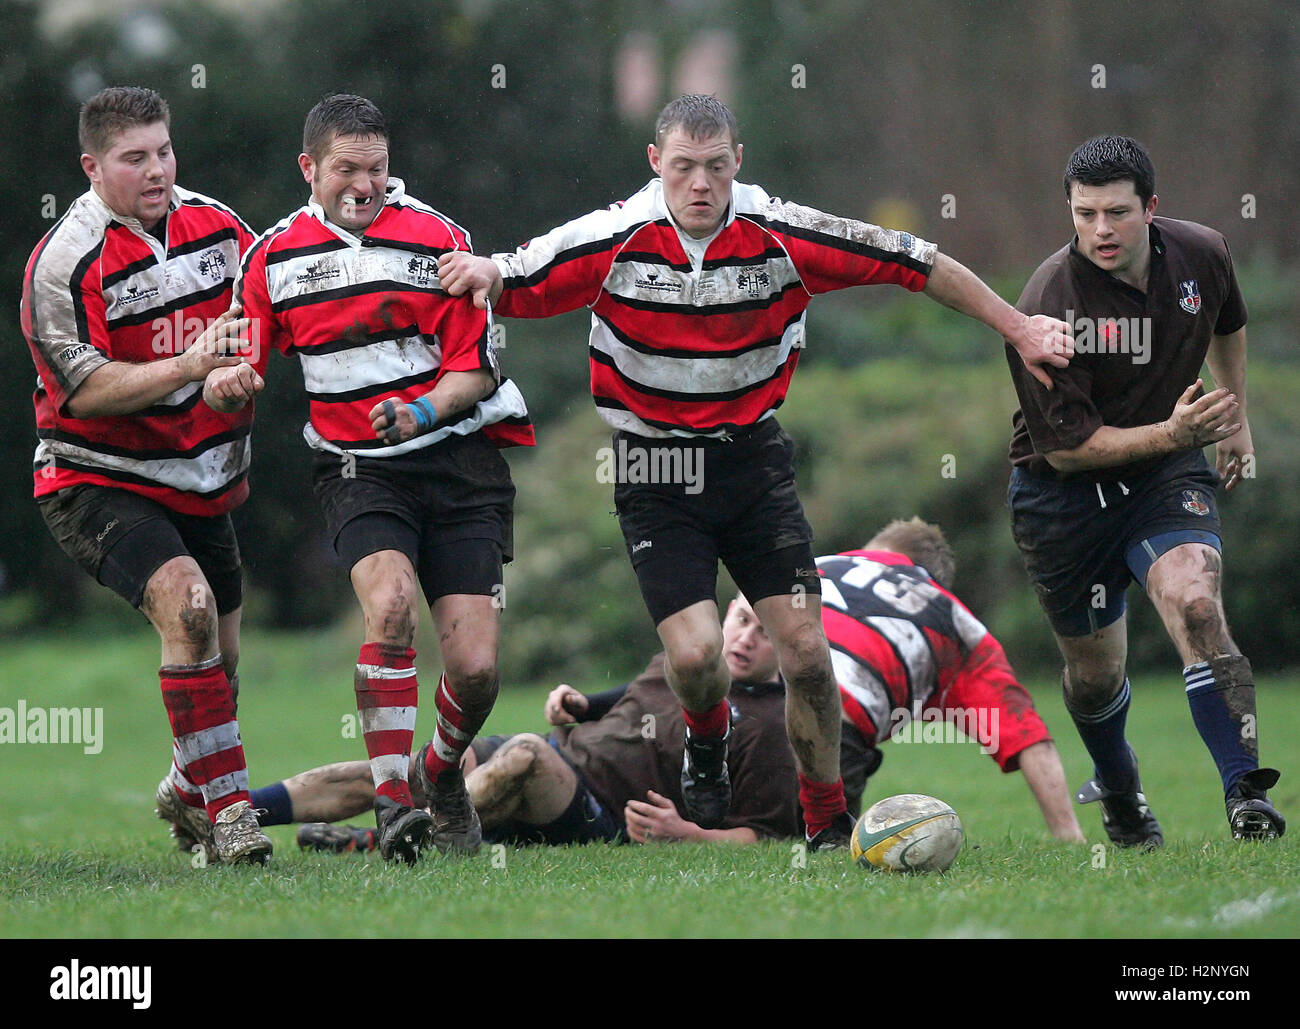 Stanford-le-Hope RFC vs Witham RFC - Essex Rugby League - 06/01/07 Stock Photo